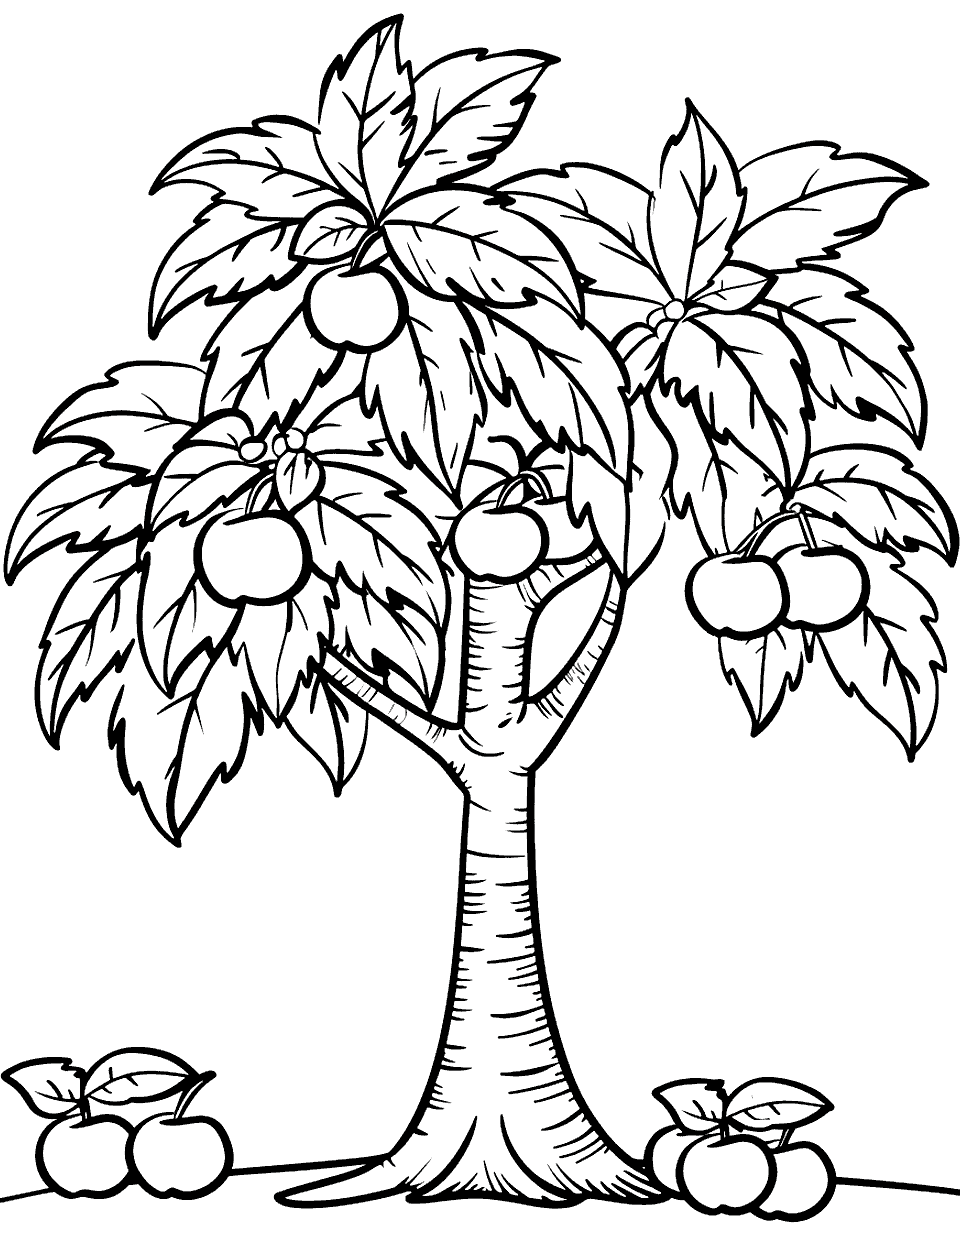 Apple Tree Harvest Coloring Page - An apple tree full of apples, with a few fallen on the ground.